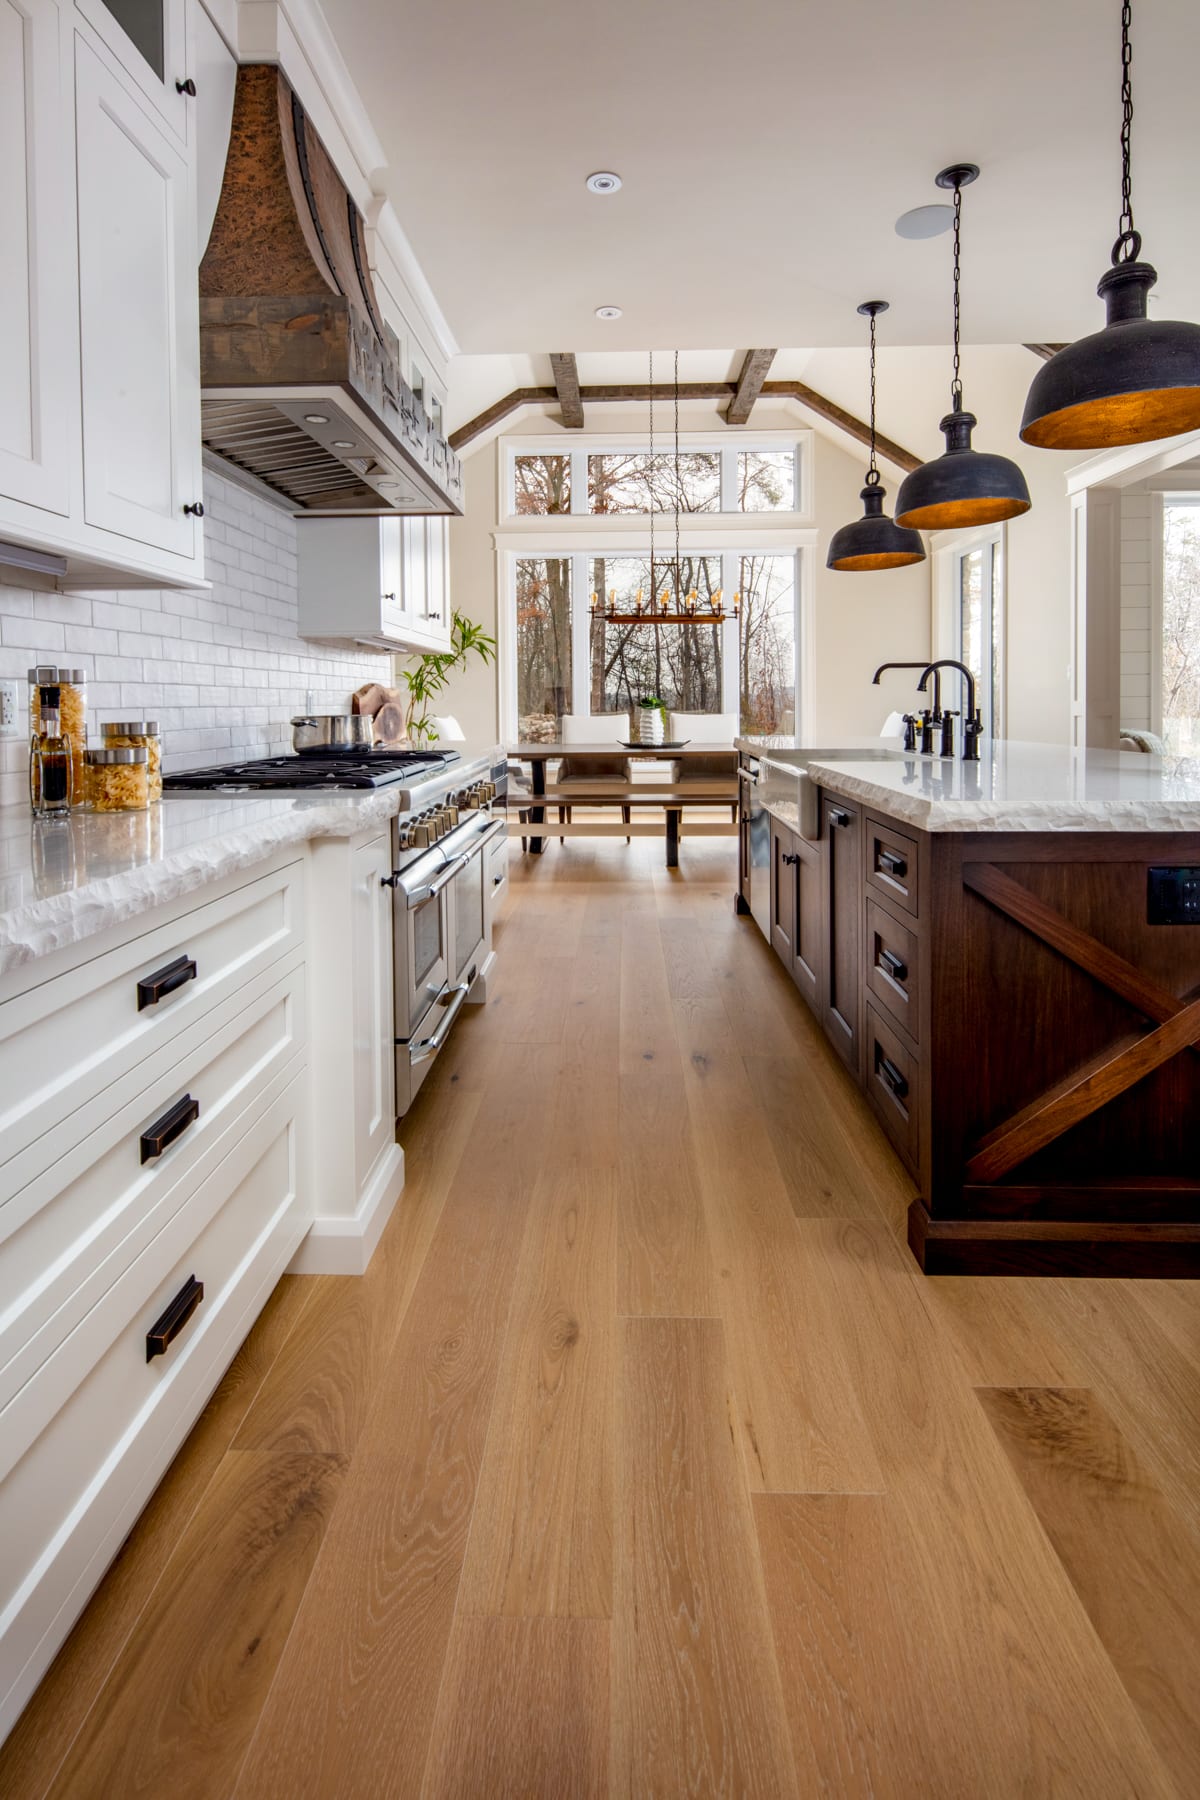 A traditional kitchen with white cabinetry and rustic details